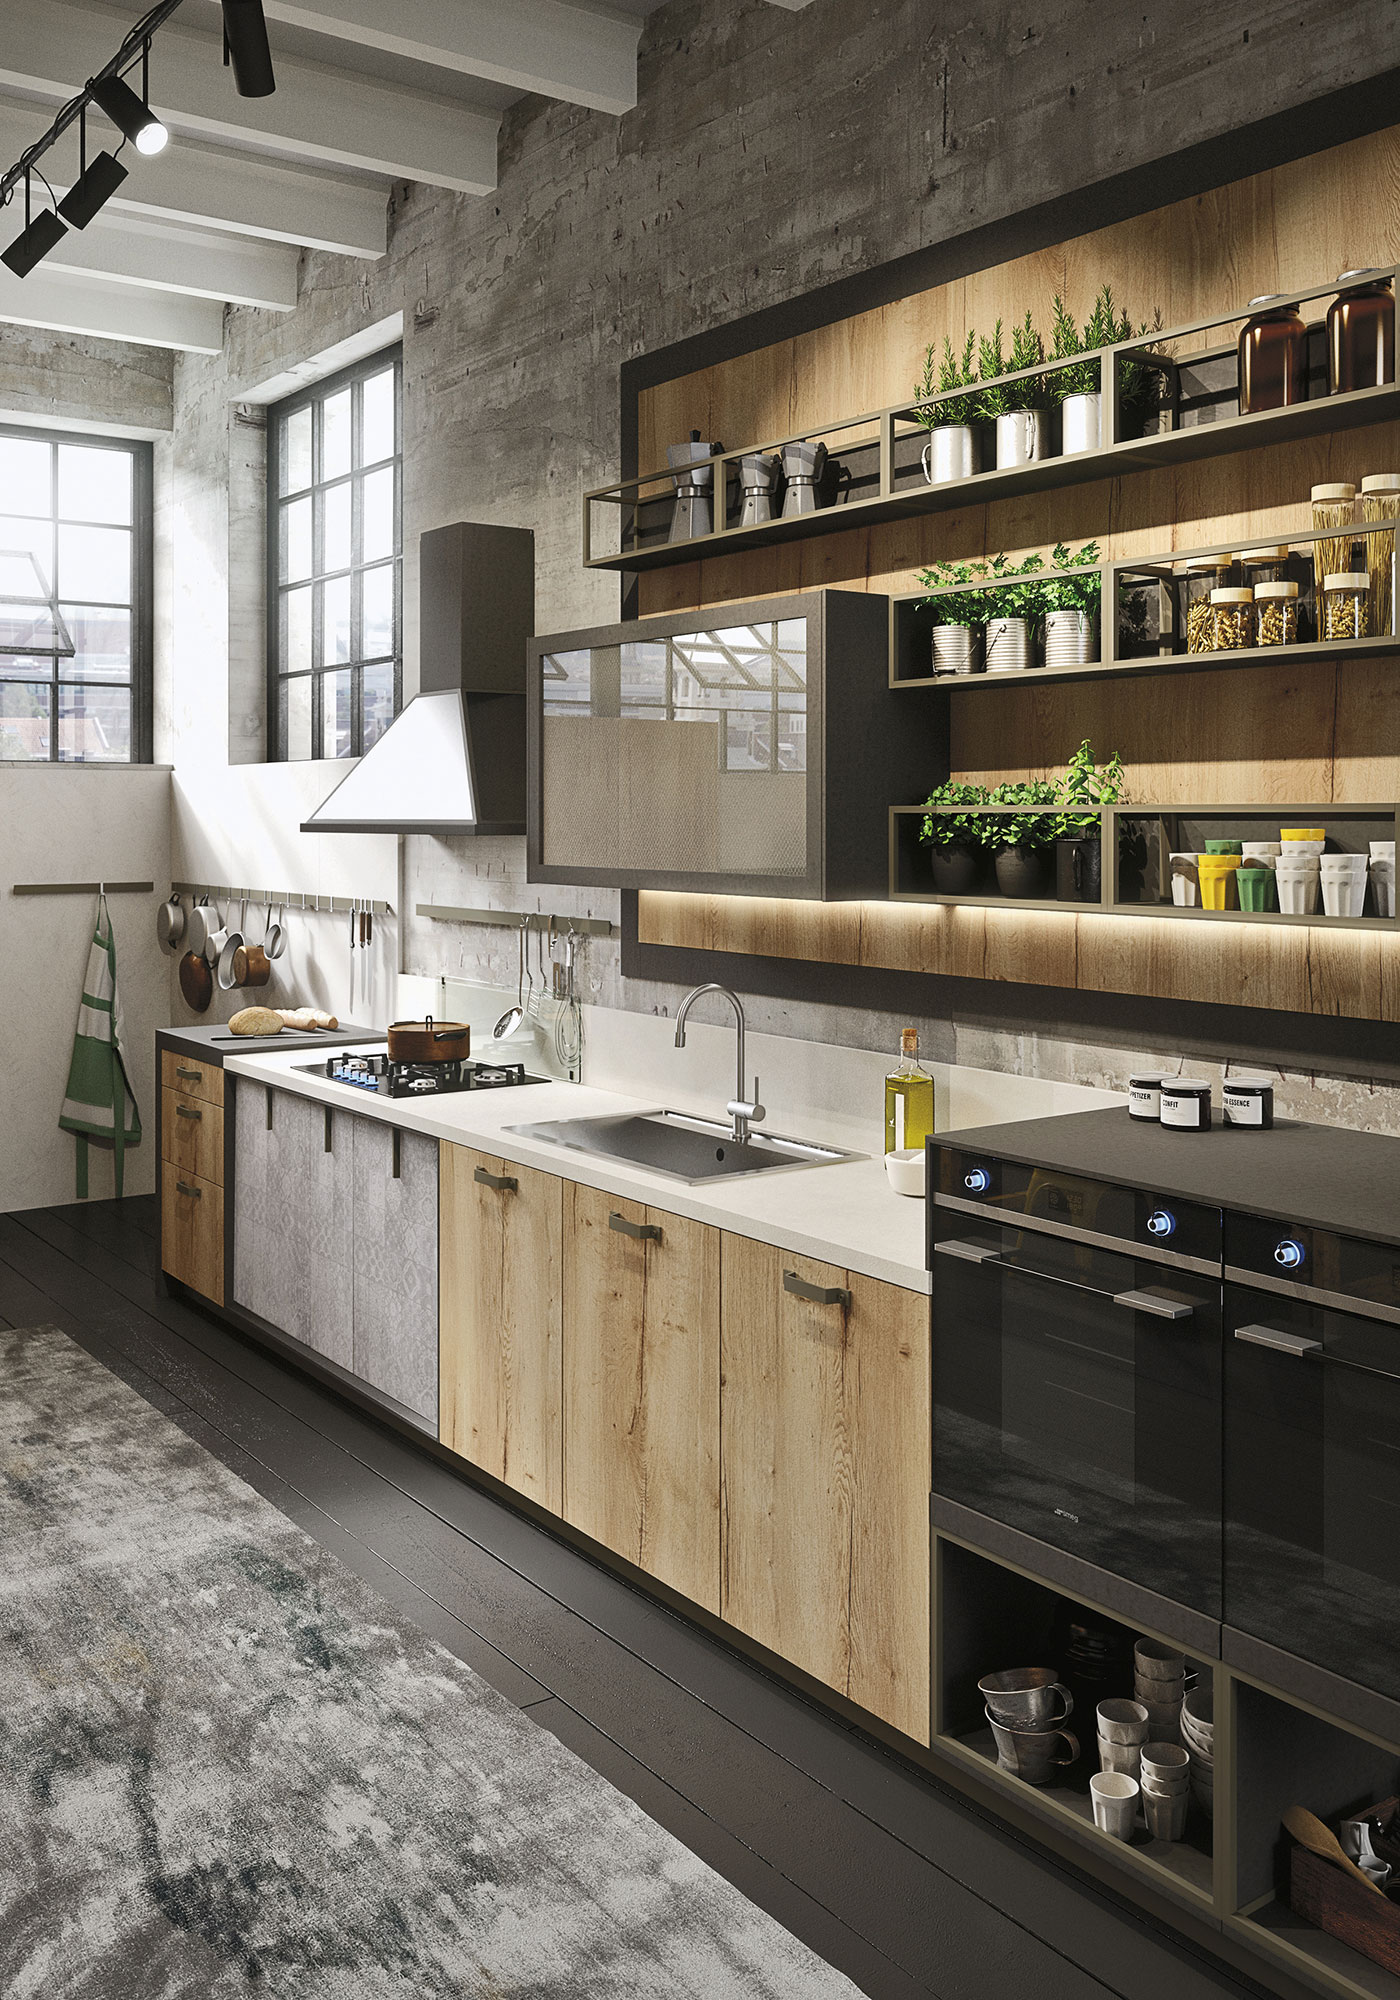 Expression Of The Latest “Urban” Trends: Loft Kitchen | Decoholic